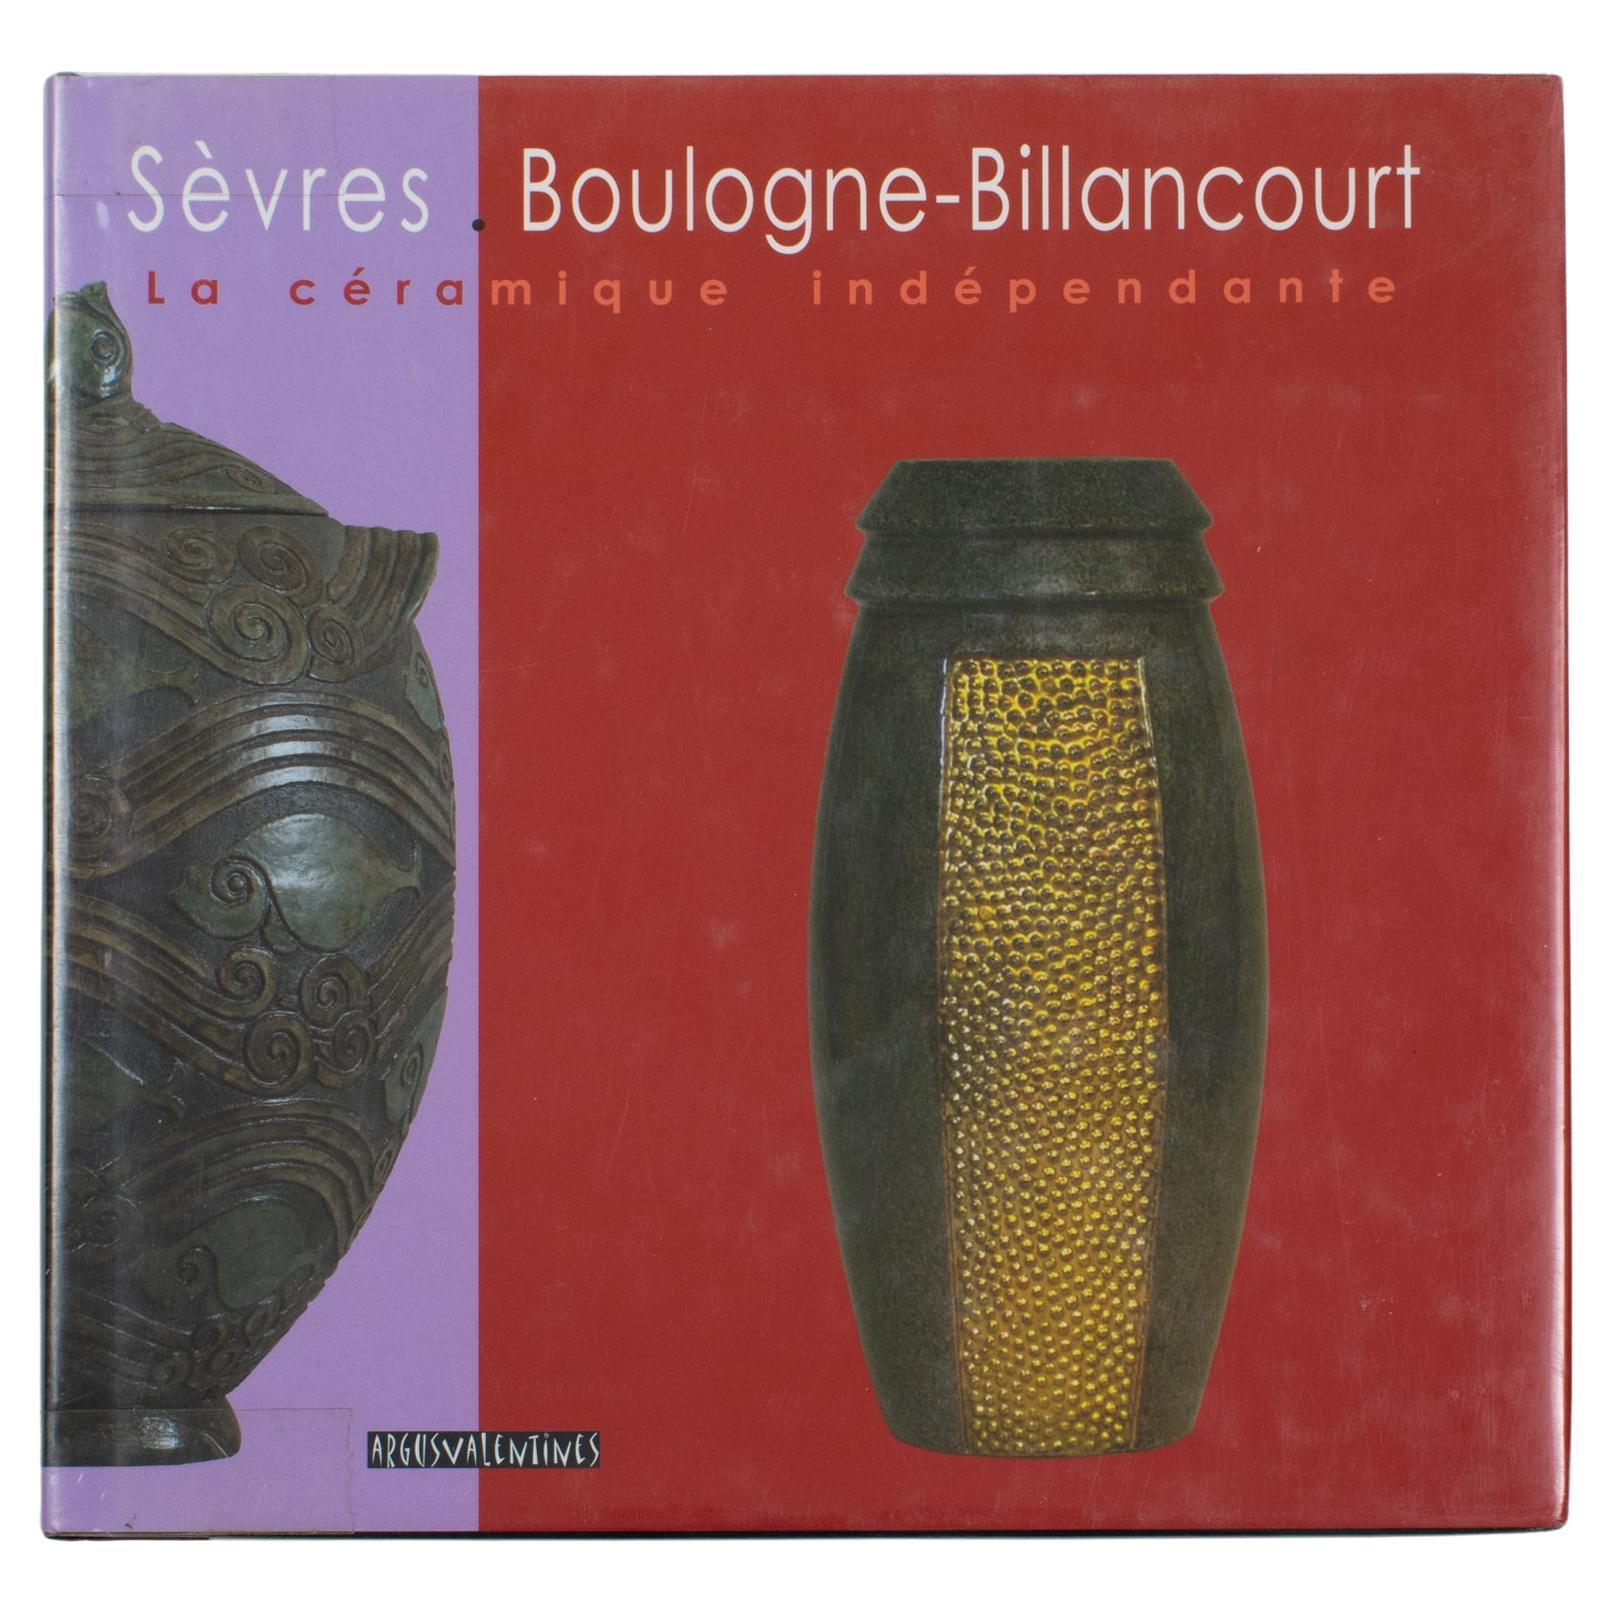 Sevres Boulogne-Billancourt, Independent Ceramic, French Book by F. Slitine 2007